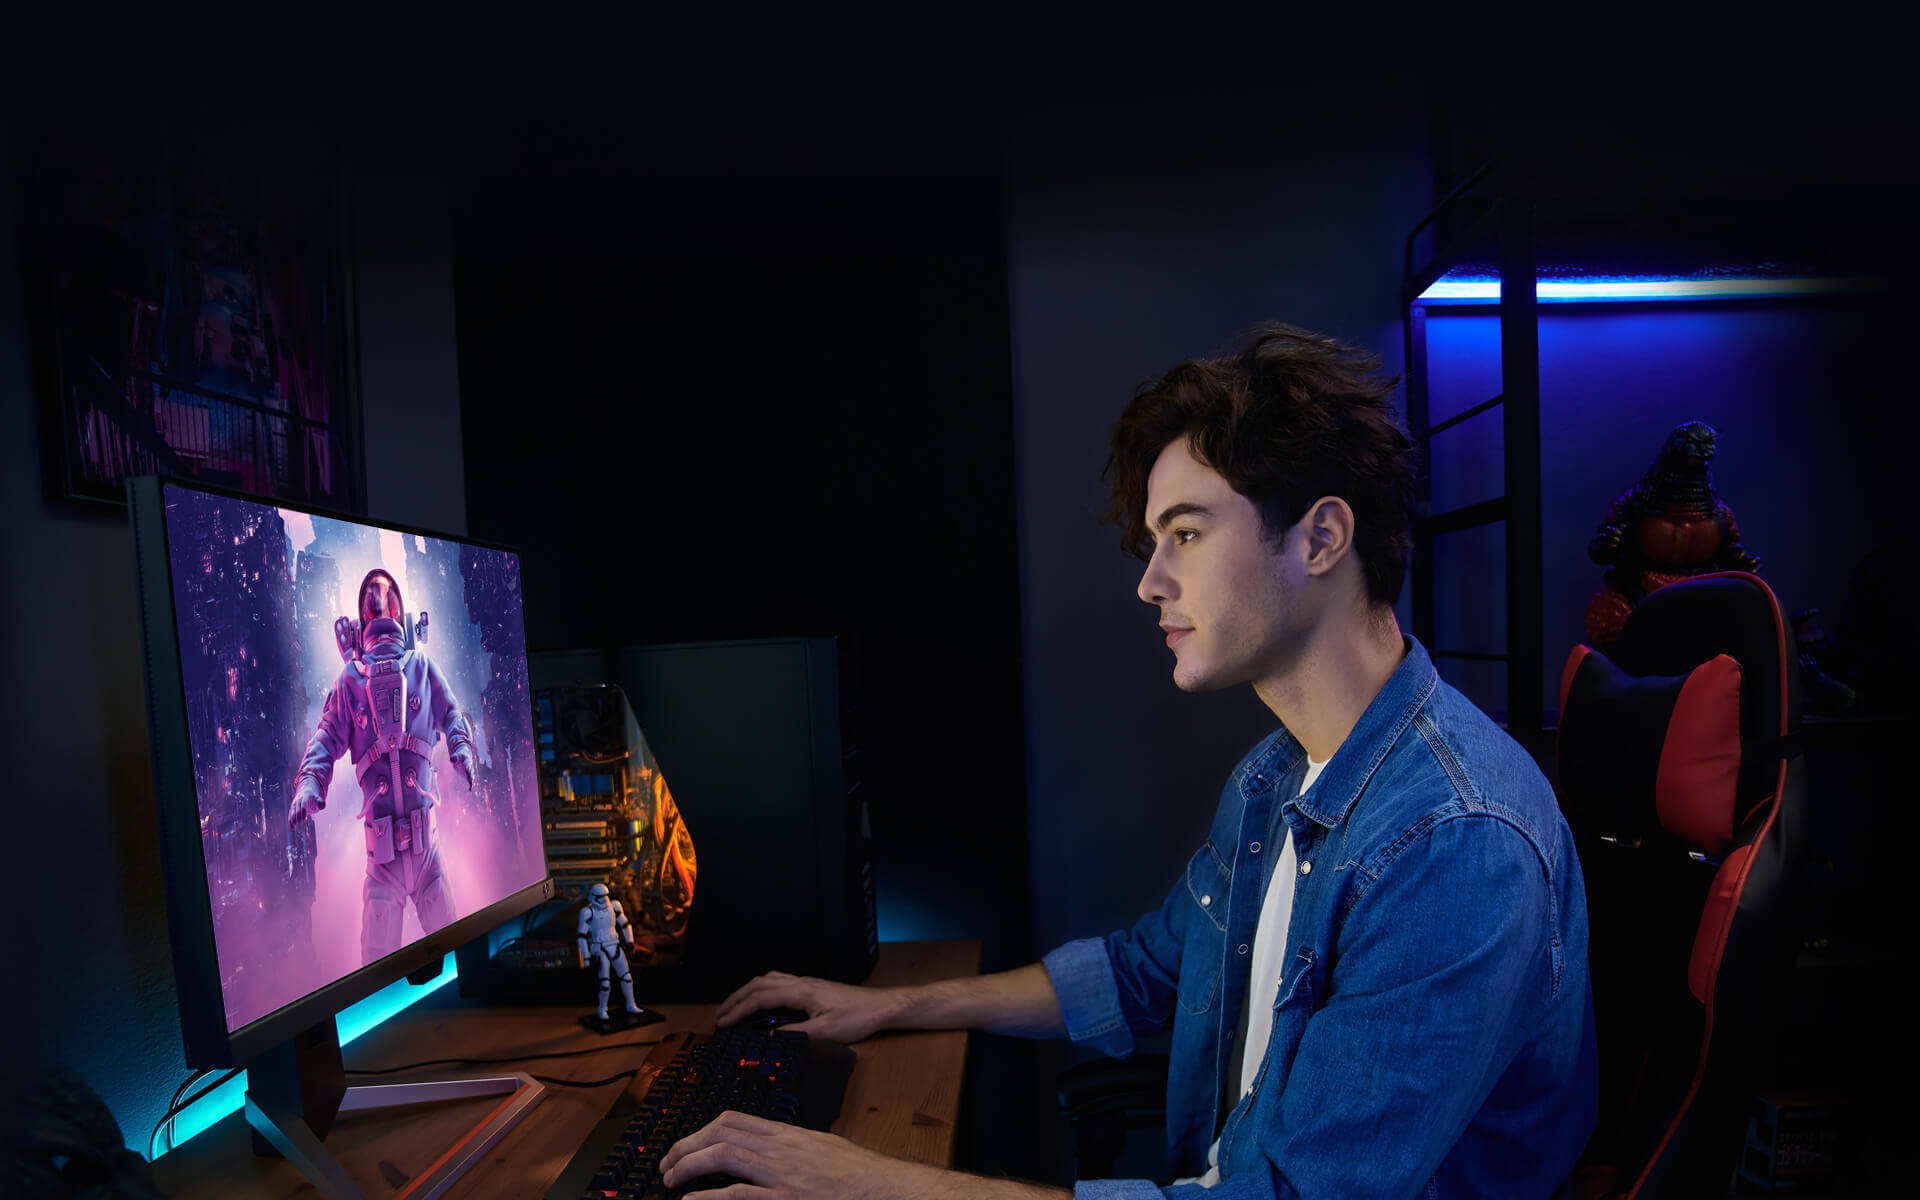  benq’s industry-leading eye-care tech reduces eye strain headaches and fatigue while improving viewer comfort